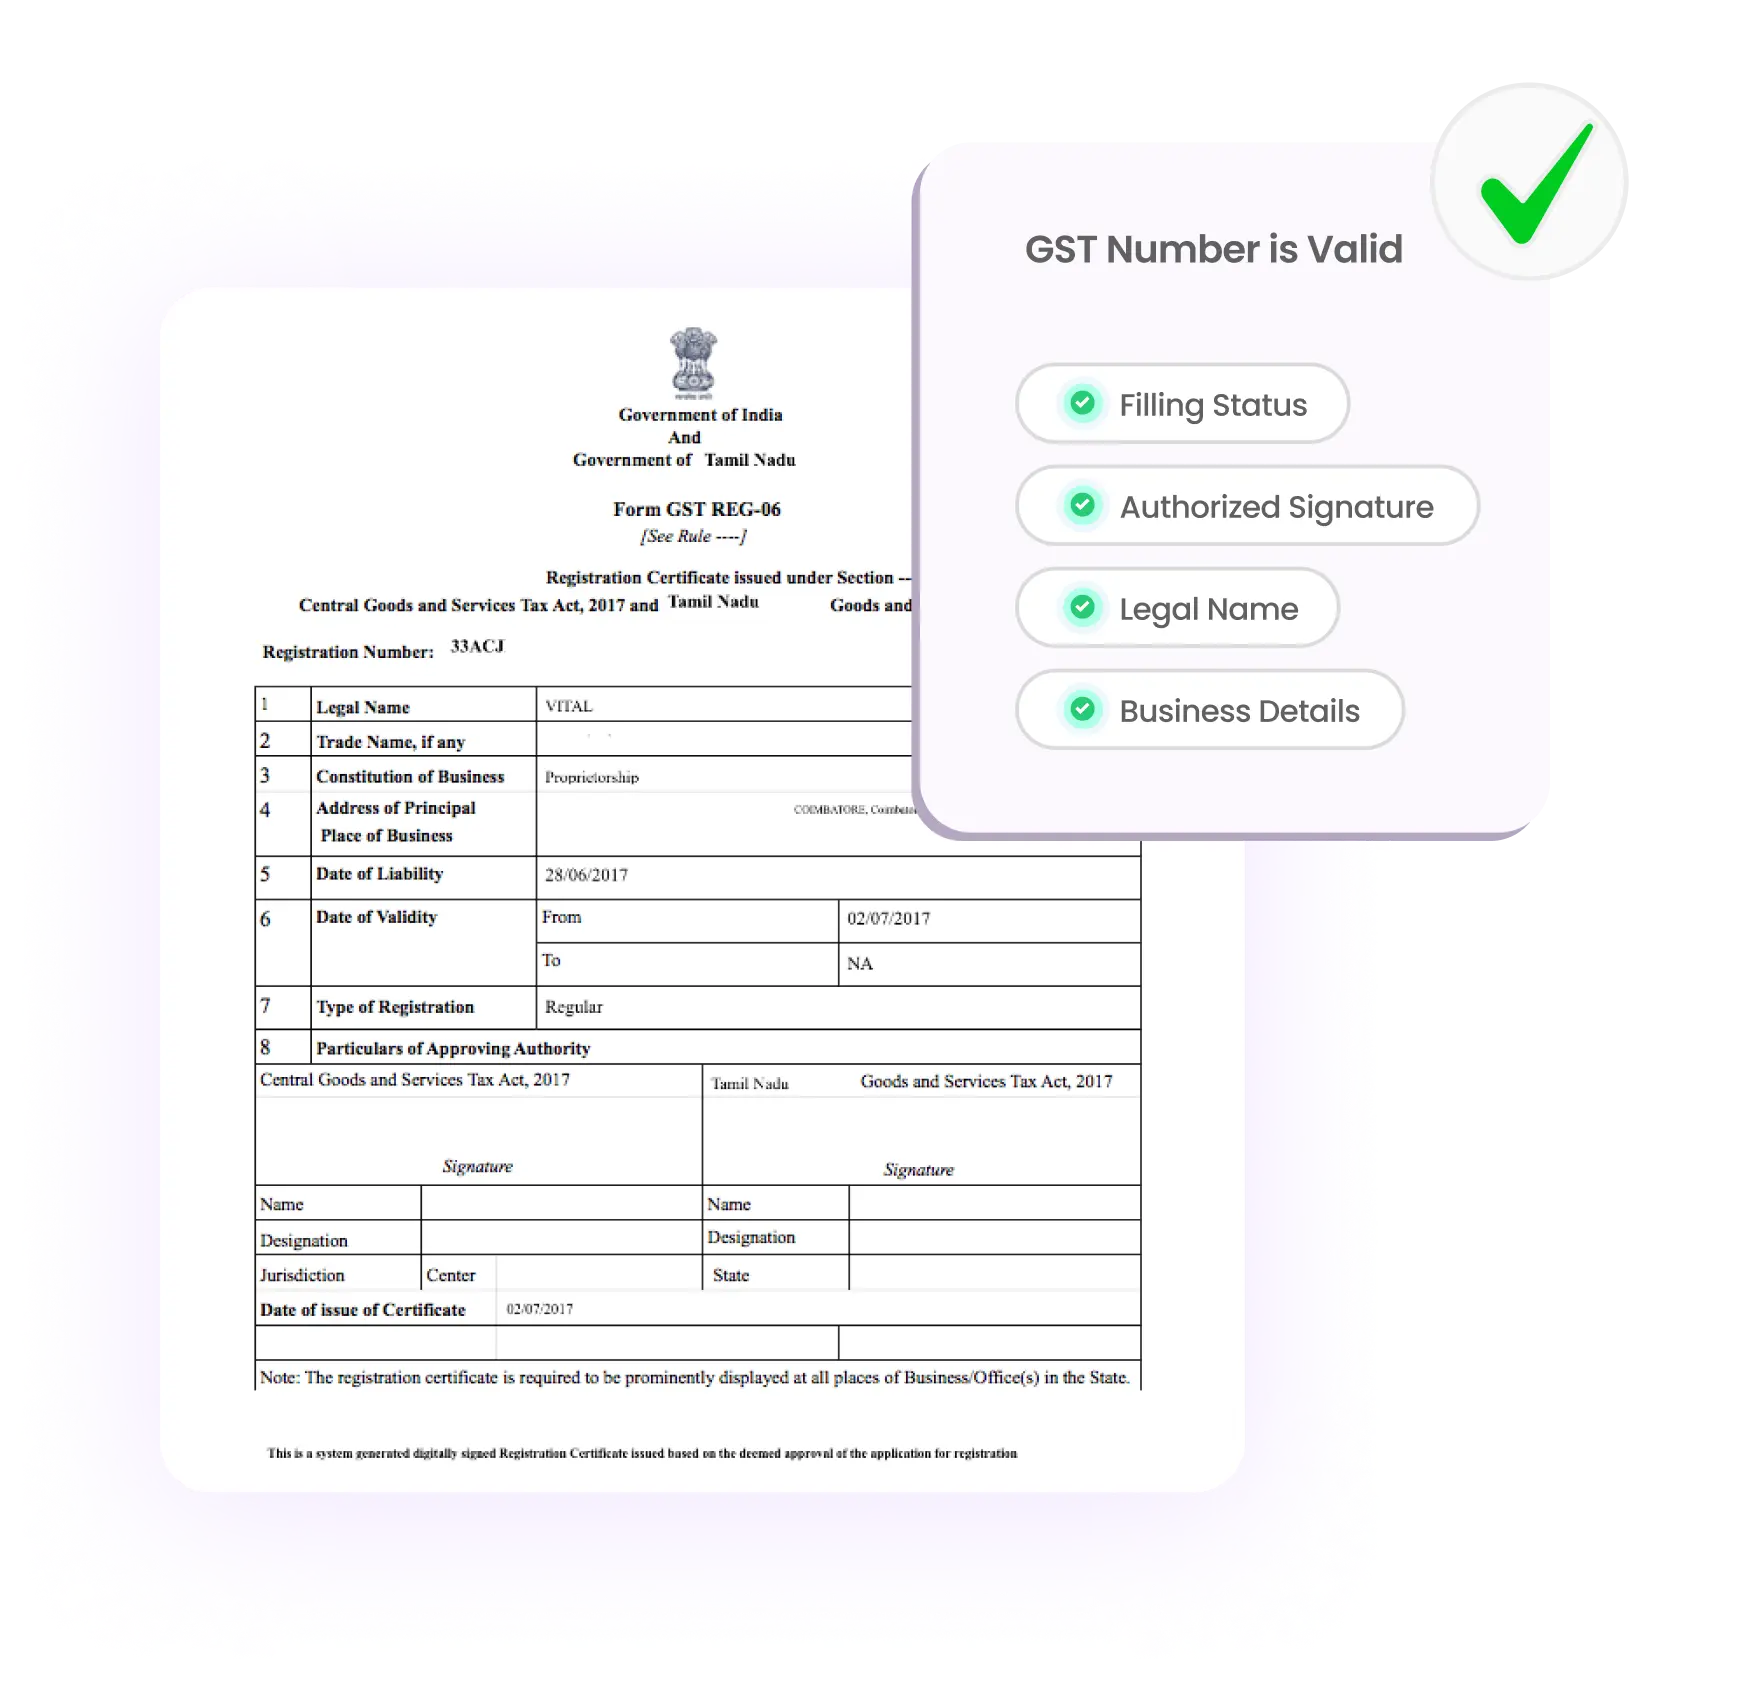 An official GST registration certificate issued by the Government of India is displayed, confirming GST number validity with checks for filing status, authorized signature, legal name, and business details.